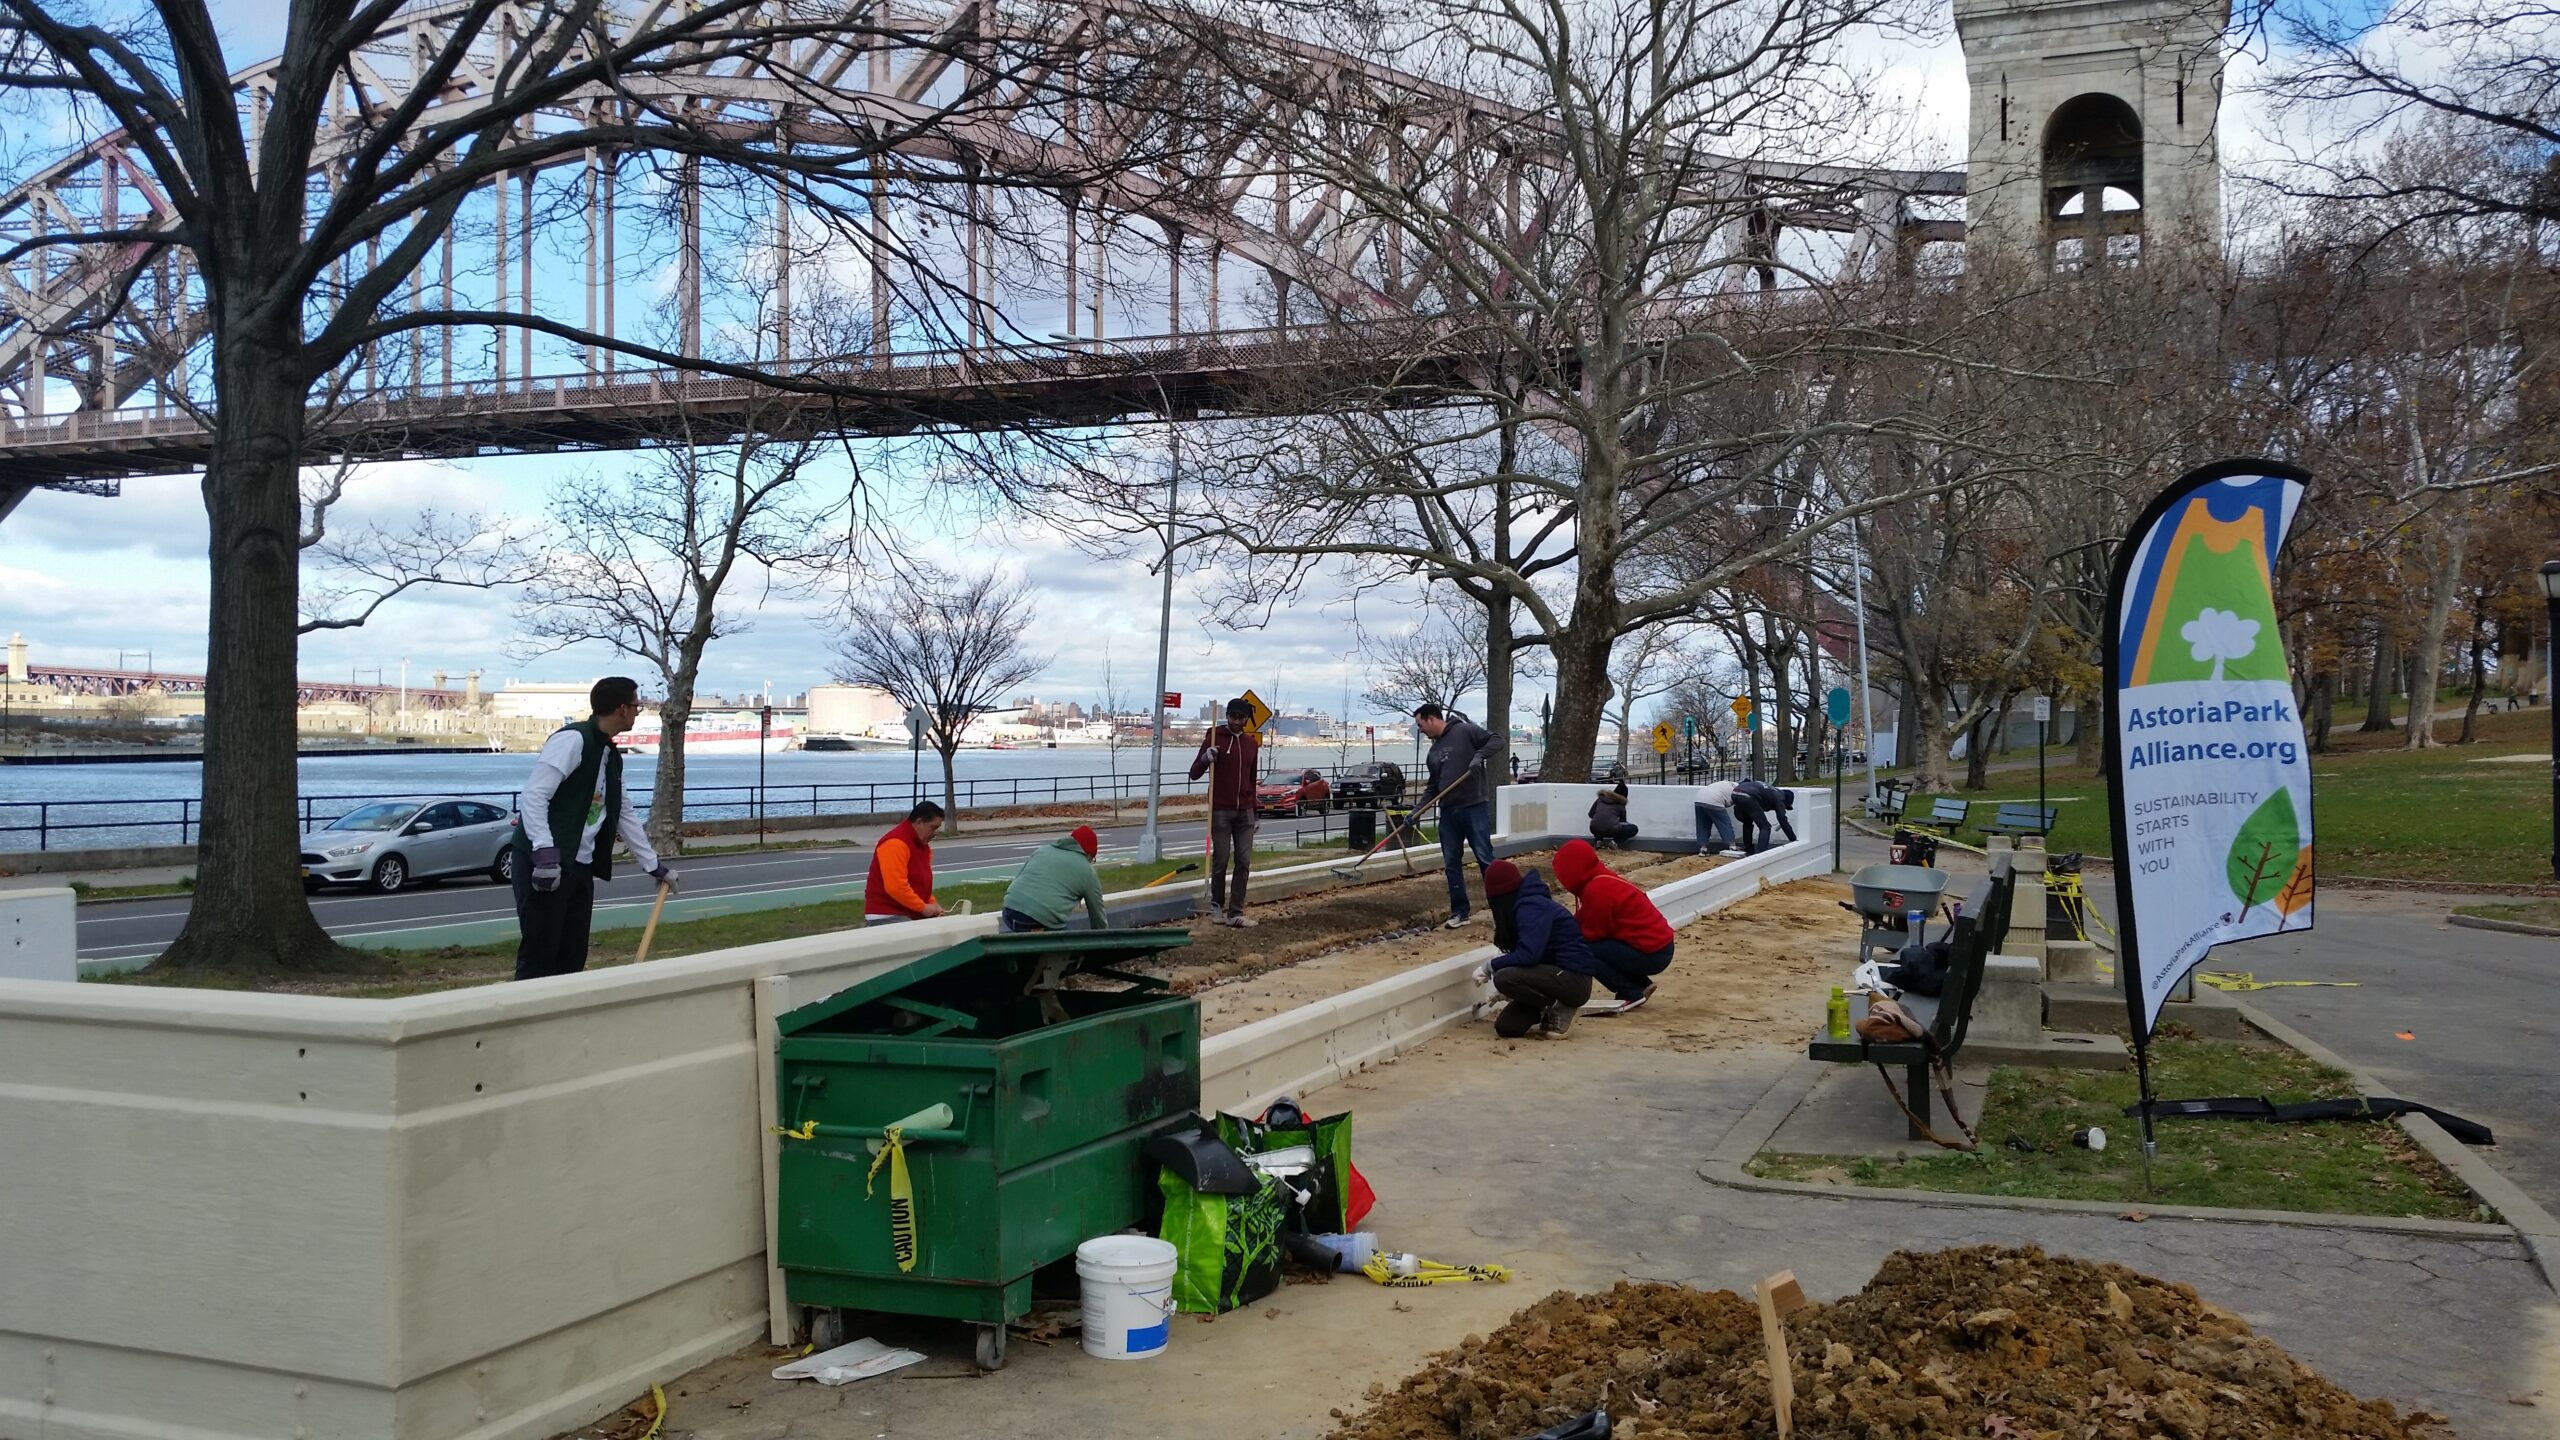 Celebrate Earth Day With The Astoria Park Alliance